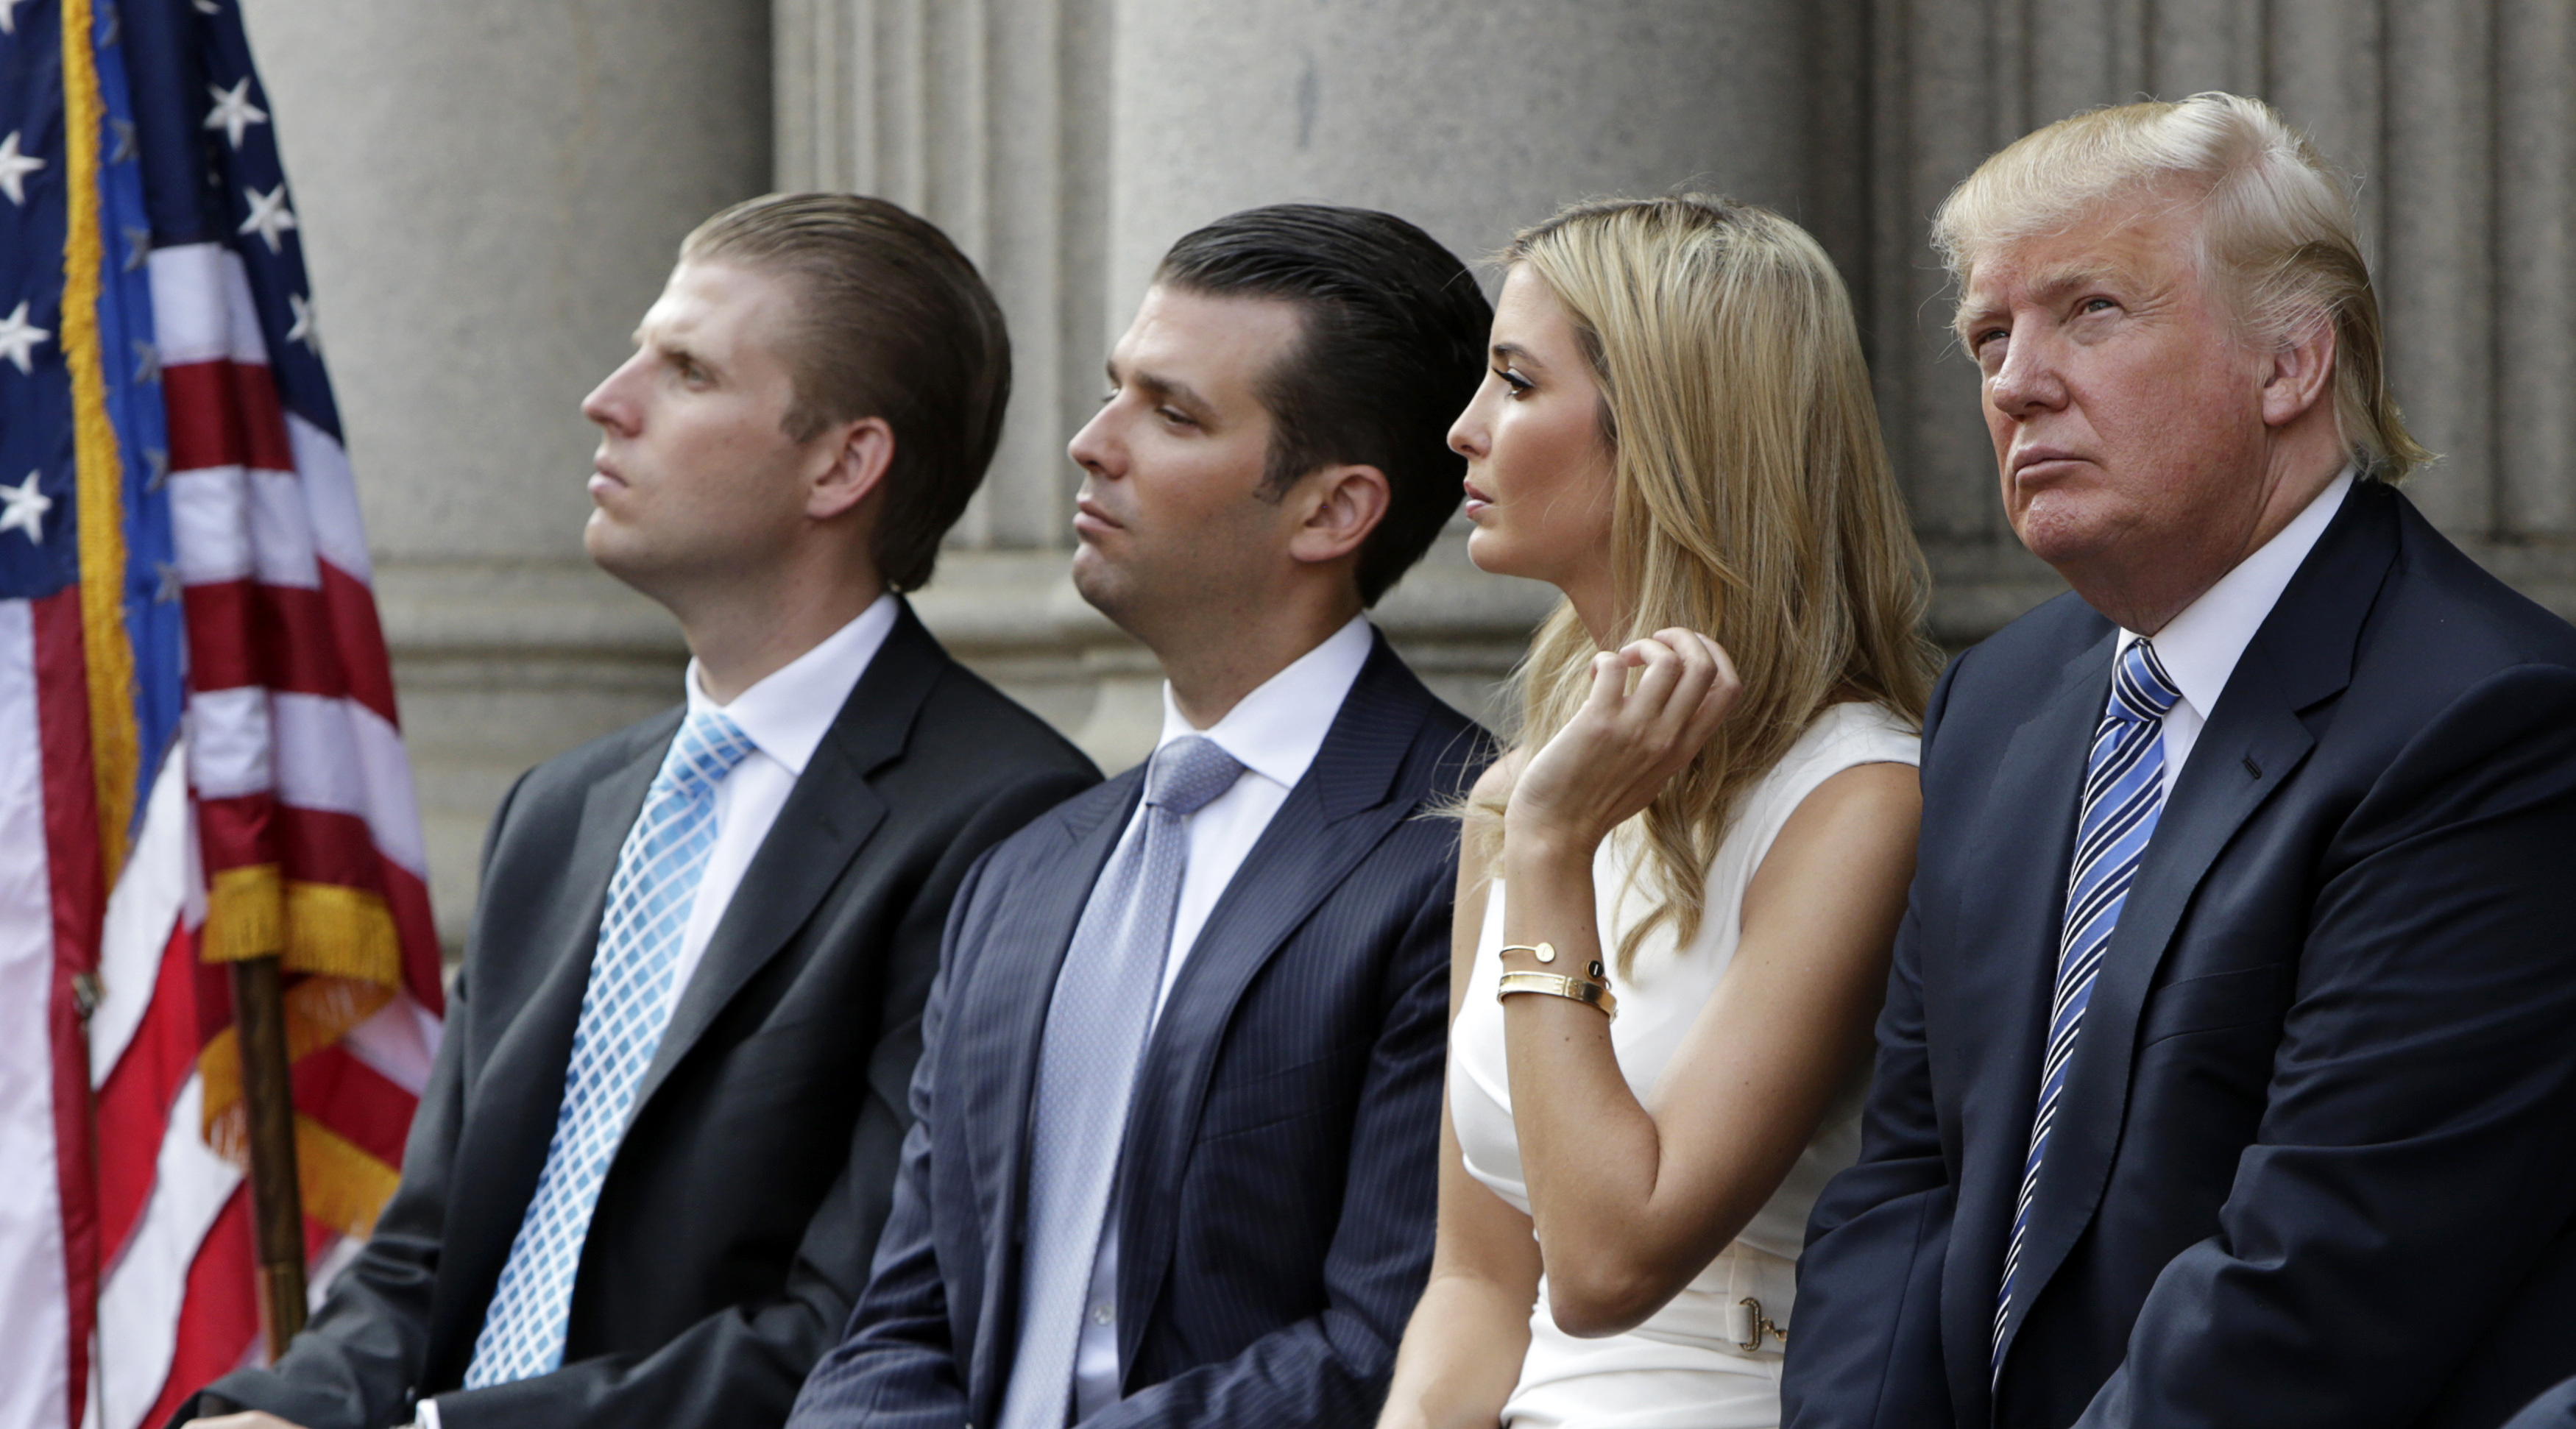 Trump family attends groundbreaking for new hotel in Washington